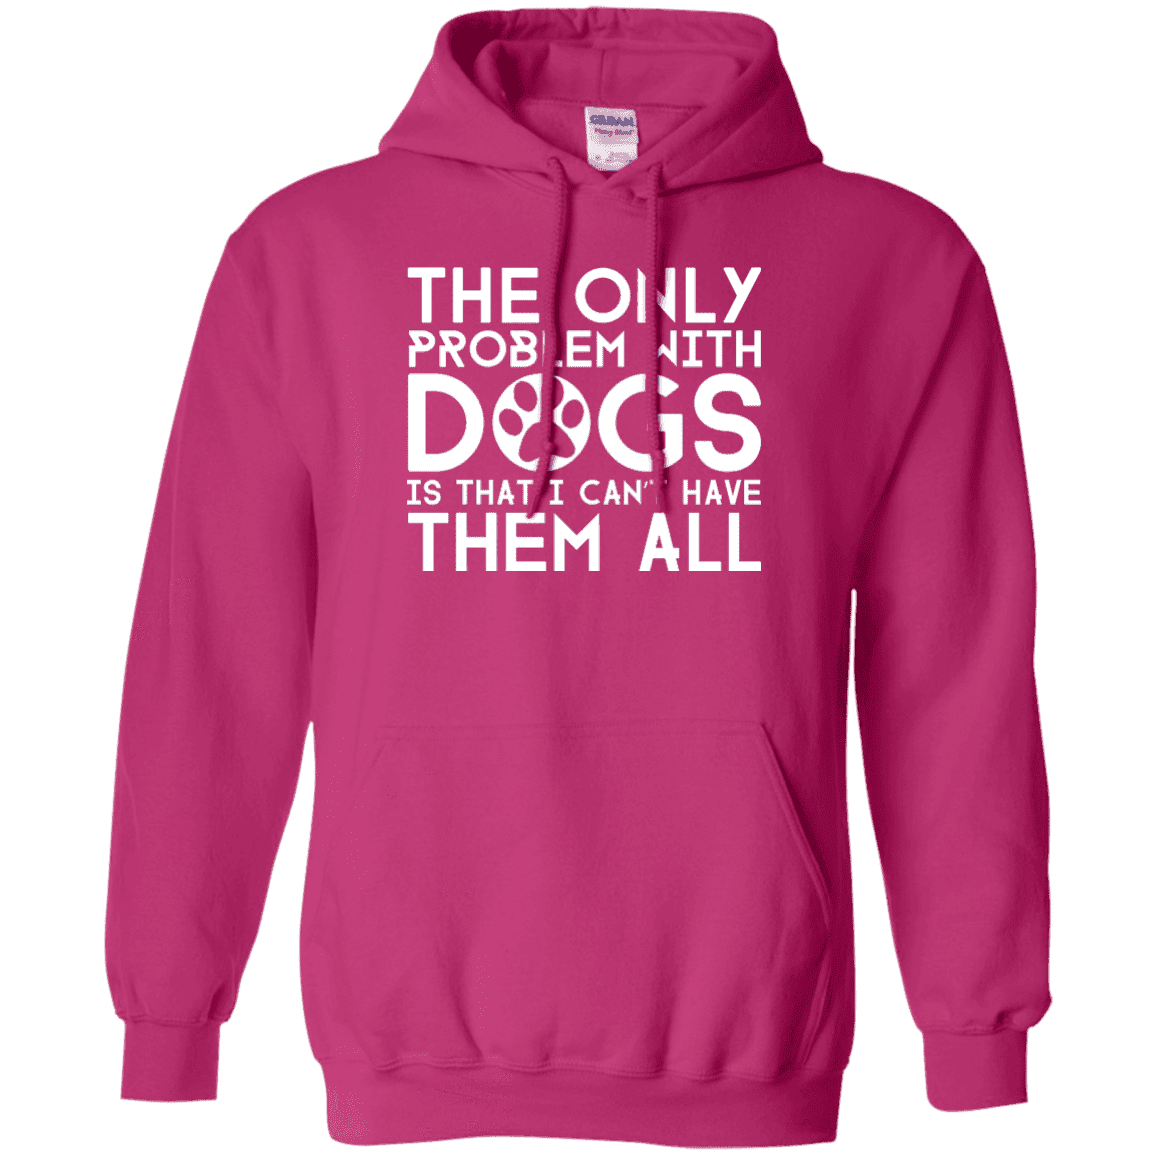 The Only Problem With Dogs - Hoodie.